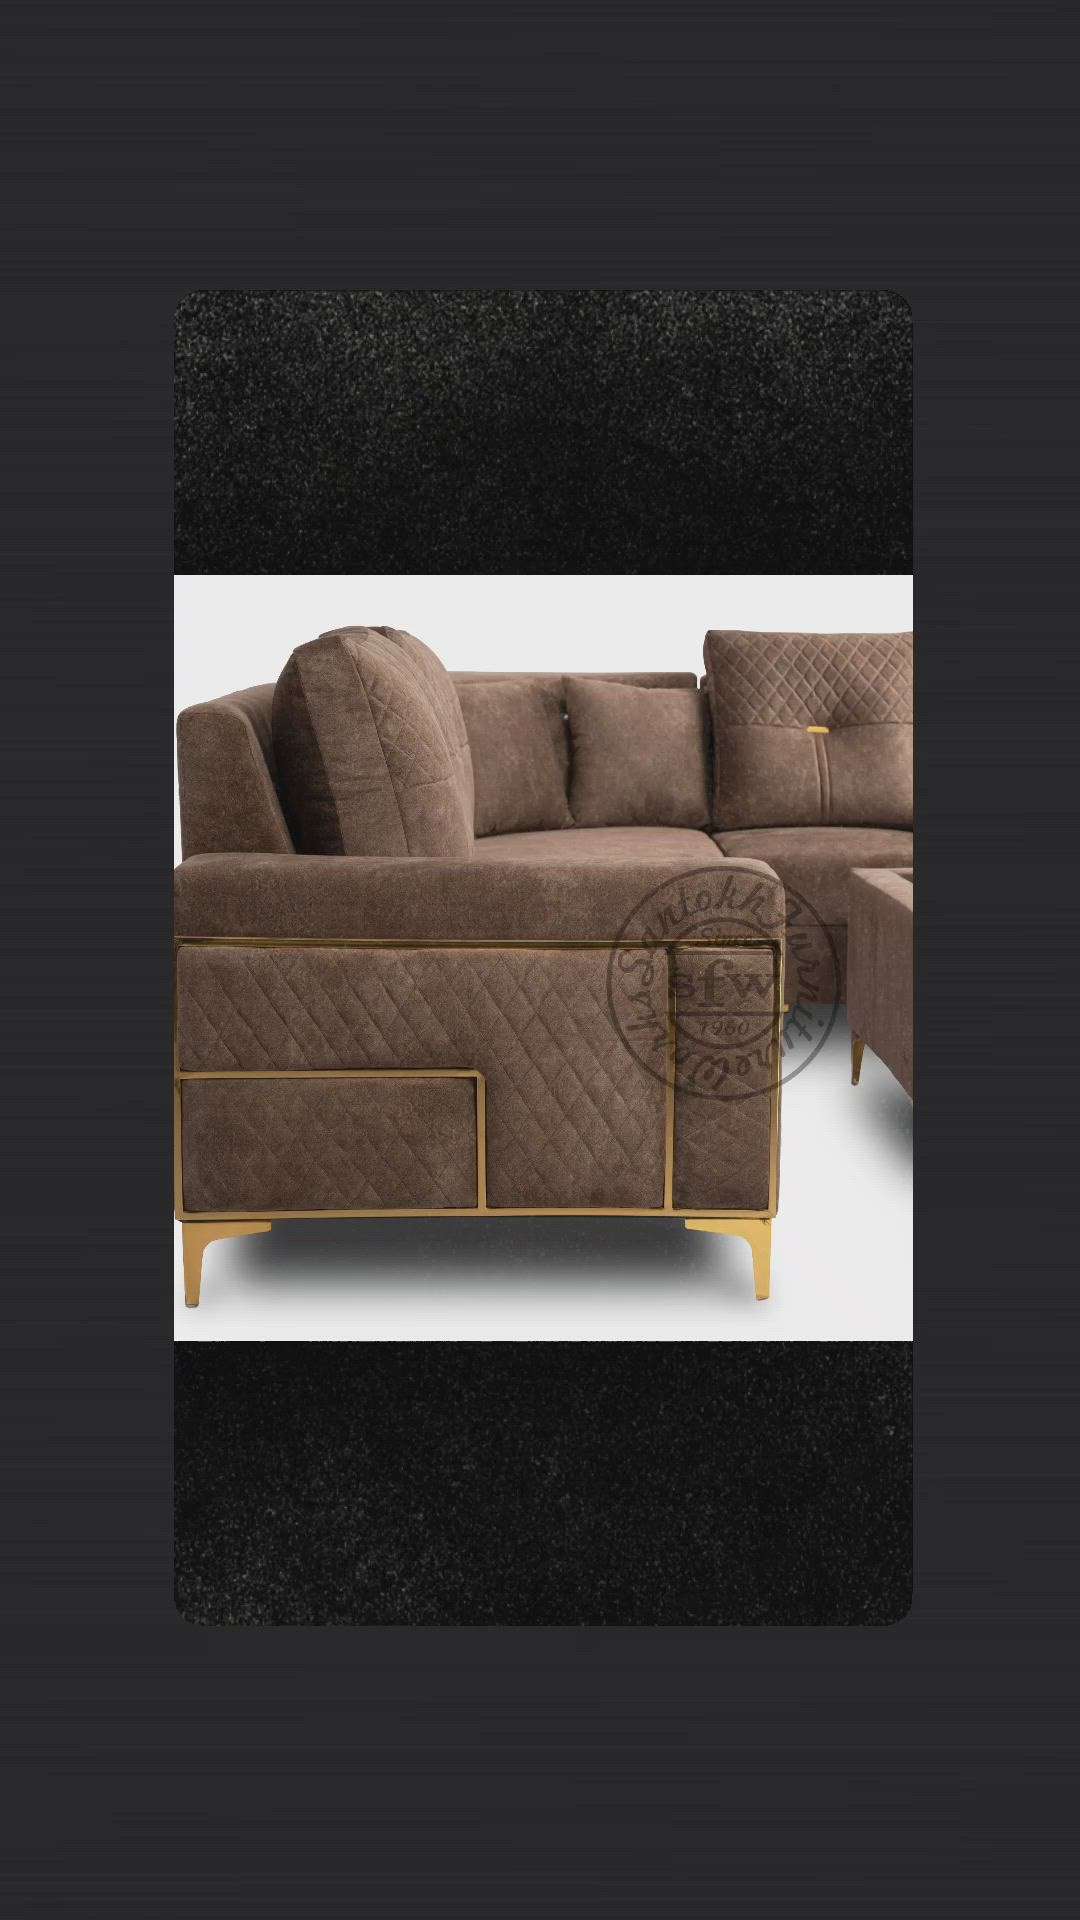 #sofa which will make all your guests jealous.

A sofa design which will surely make you fall in love with them.

We design our furniture with utmost care and love. #design
.
.
.
.
 #furniture #interiordesign #homedecor #interior #furnituredesign #home #decor #sofa #homedesign #decoration #livingroom #art #luxury #delhi #interiordesigner #wood  #handmade #style #woodworking #wholesale #designer #comfort #interiordecor #kirtinagar #couch #beautiful
#comfortable #budget